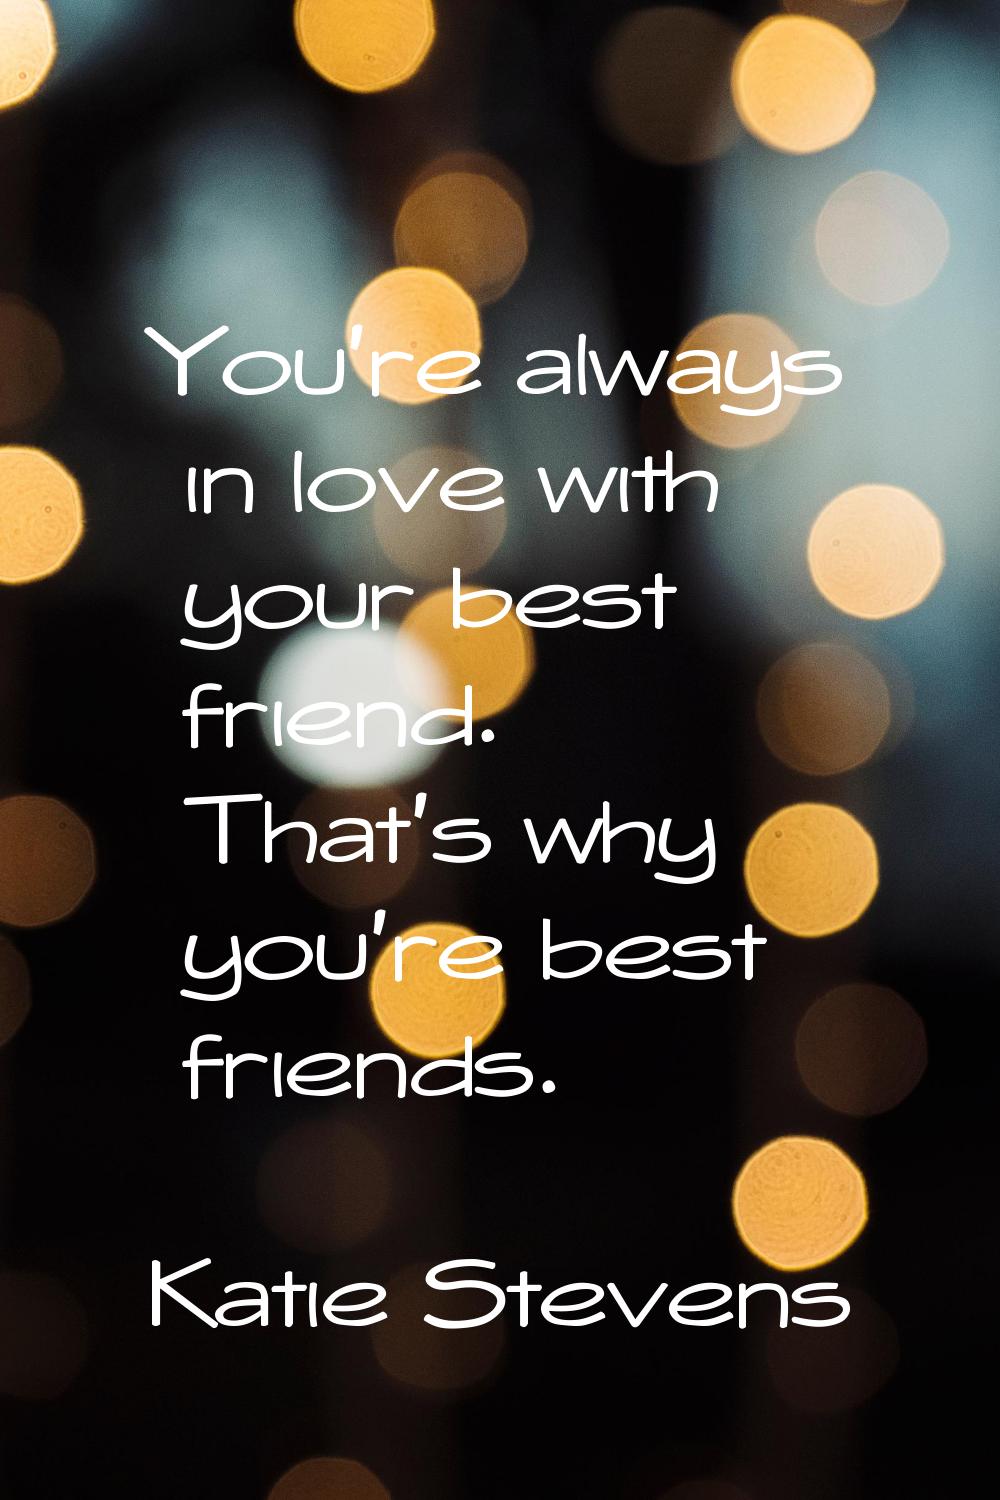 You're always in love with your best friend. That's why you're best friends.